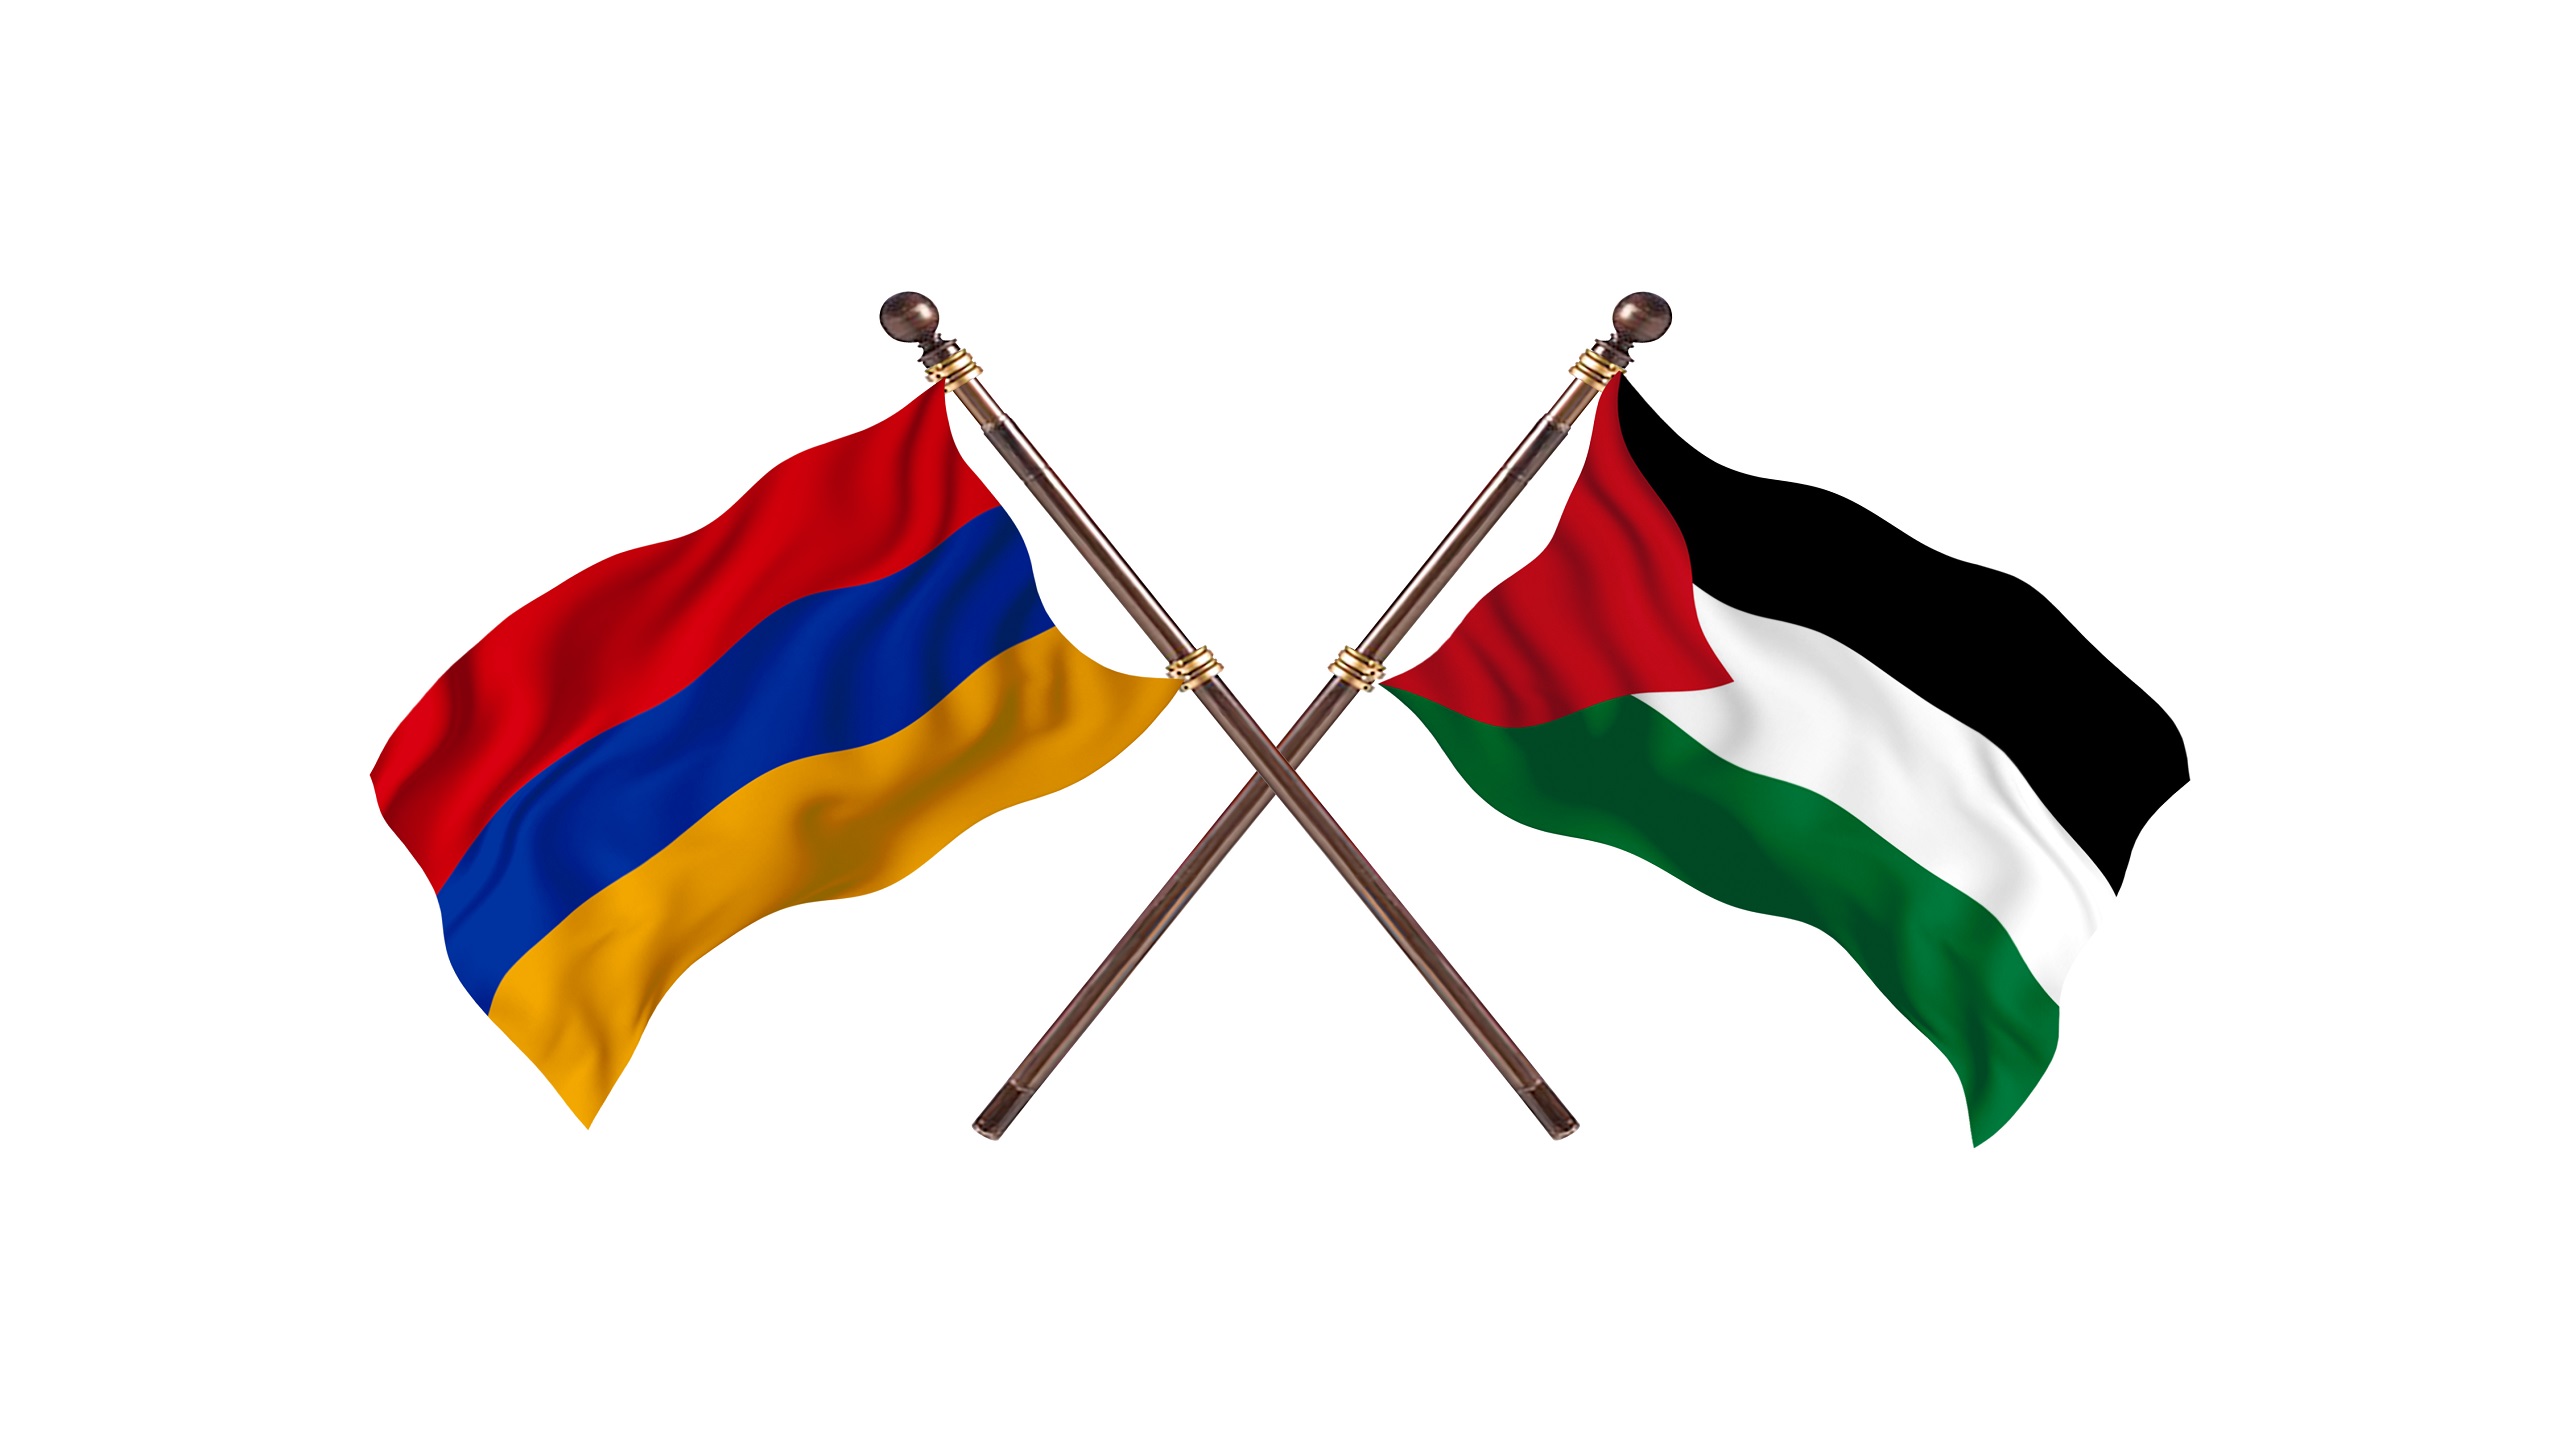 Armenia’s Recognition of Palestine Sparks Diplomatic Row With Israel